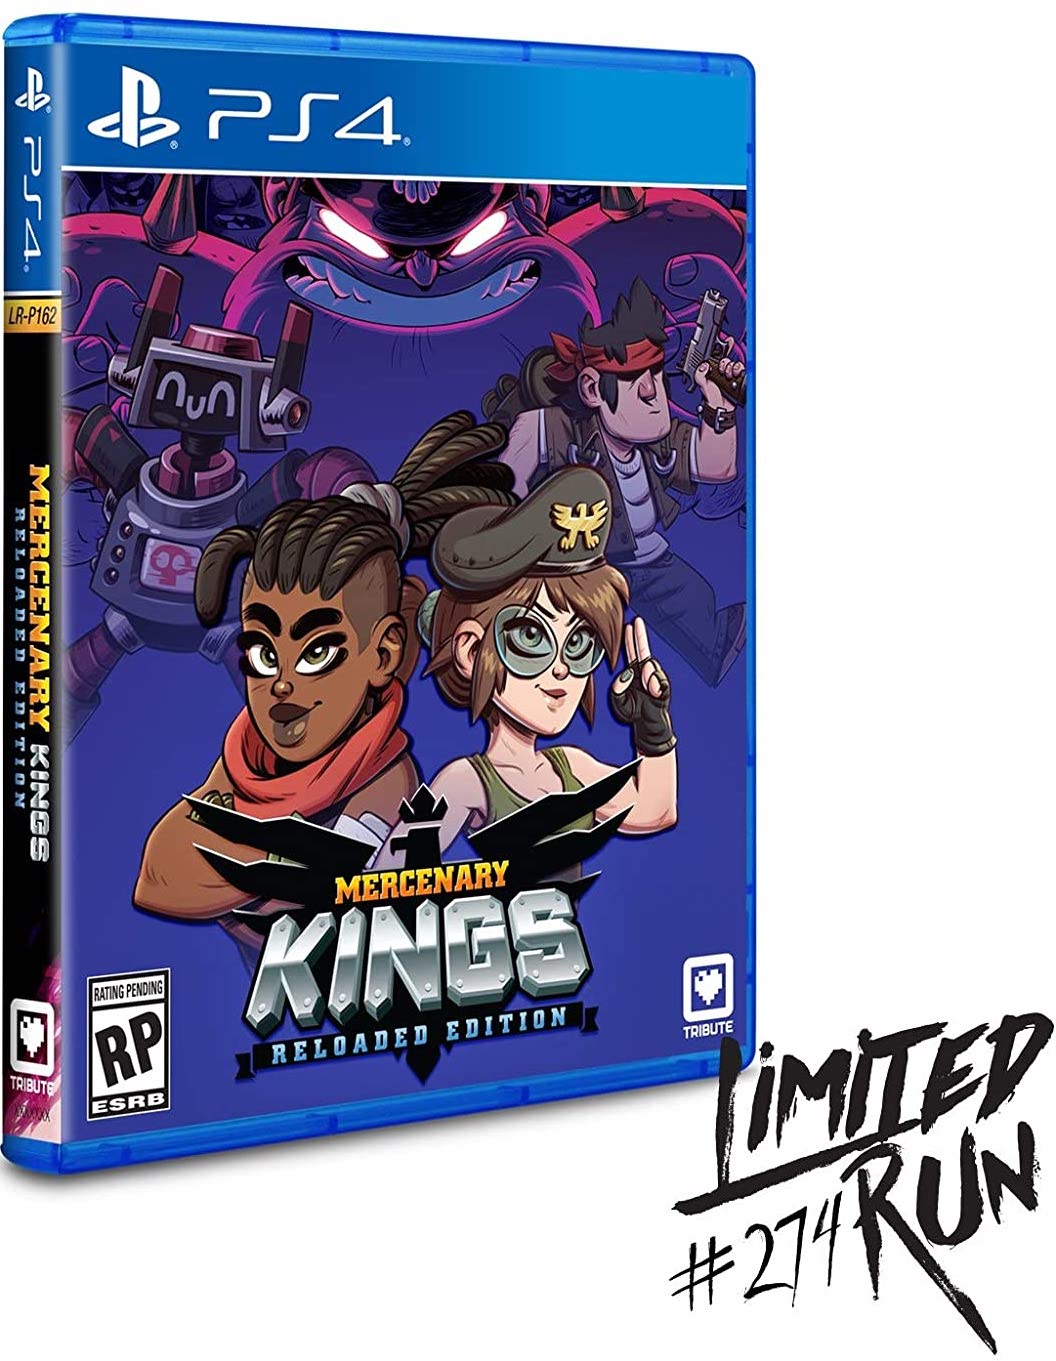 Mercenary Kings - Reloaded Edition (Limited Run) (PS4), Tribute